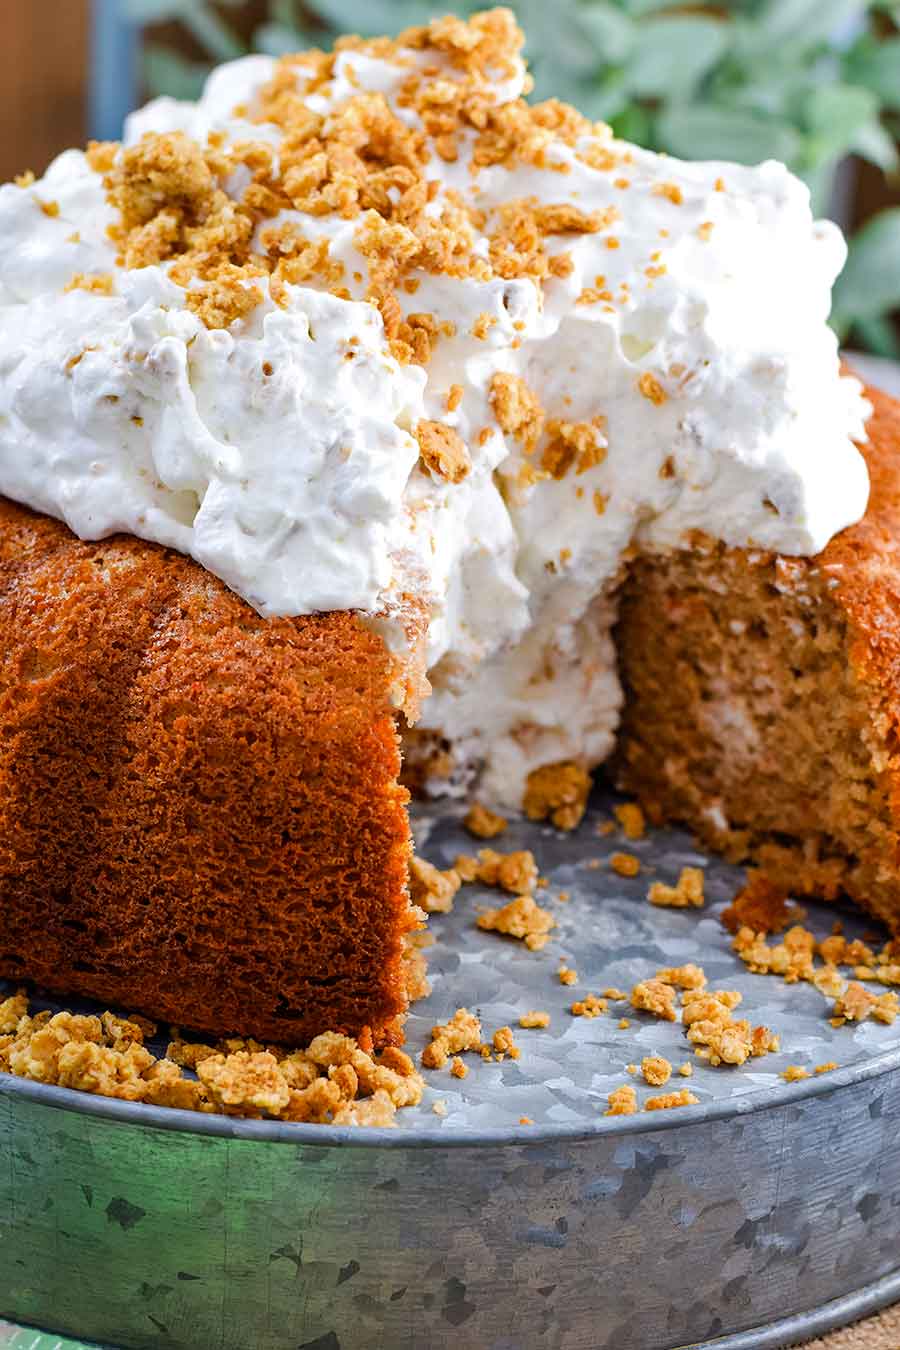 A Whipping Cream Pound Cake That'll Knock You Out!